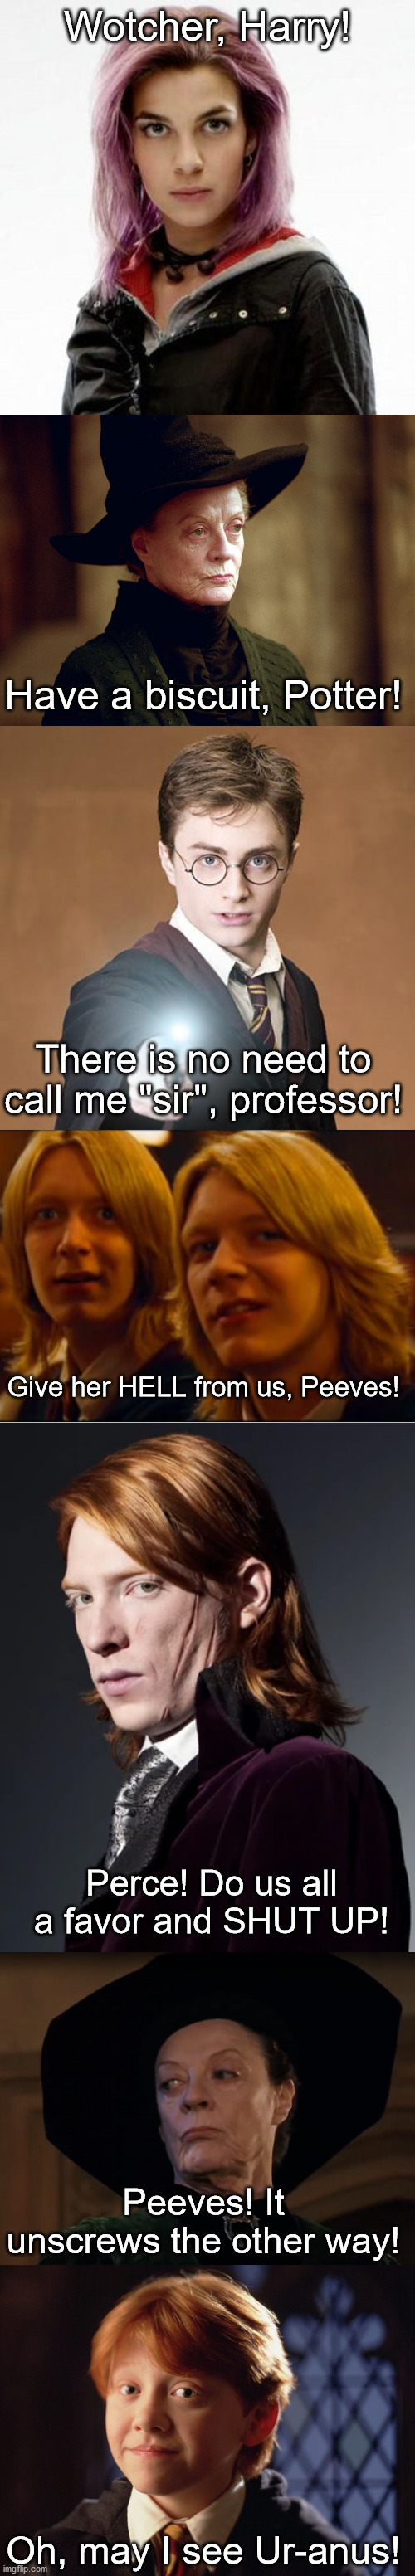 Quotes from the books, that I really missed in the movies | Wotcher, Harry! Have a biscuit, Potter! There is no need to call me "sir", professor! Give her HELL from us, Peeves! Perce! Do us all a favor and SHUT UP! Peeves! It unscrews the other way! Oh, may I see Ur-anus! | image tagged in weasley twins,harry potter casting a spell,ron weasley,unamused mcgonagall,minerva mcgonagall,nymphadora tonks | made w/ Imgflip meme maker